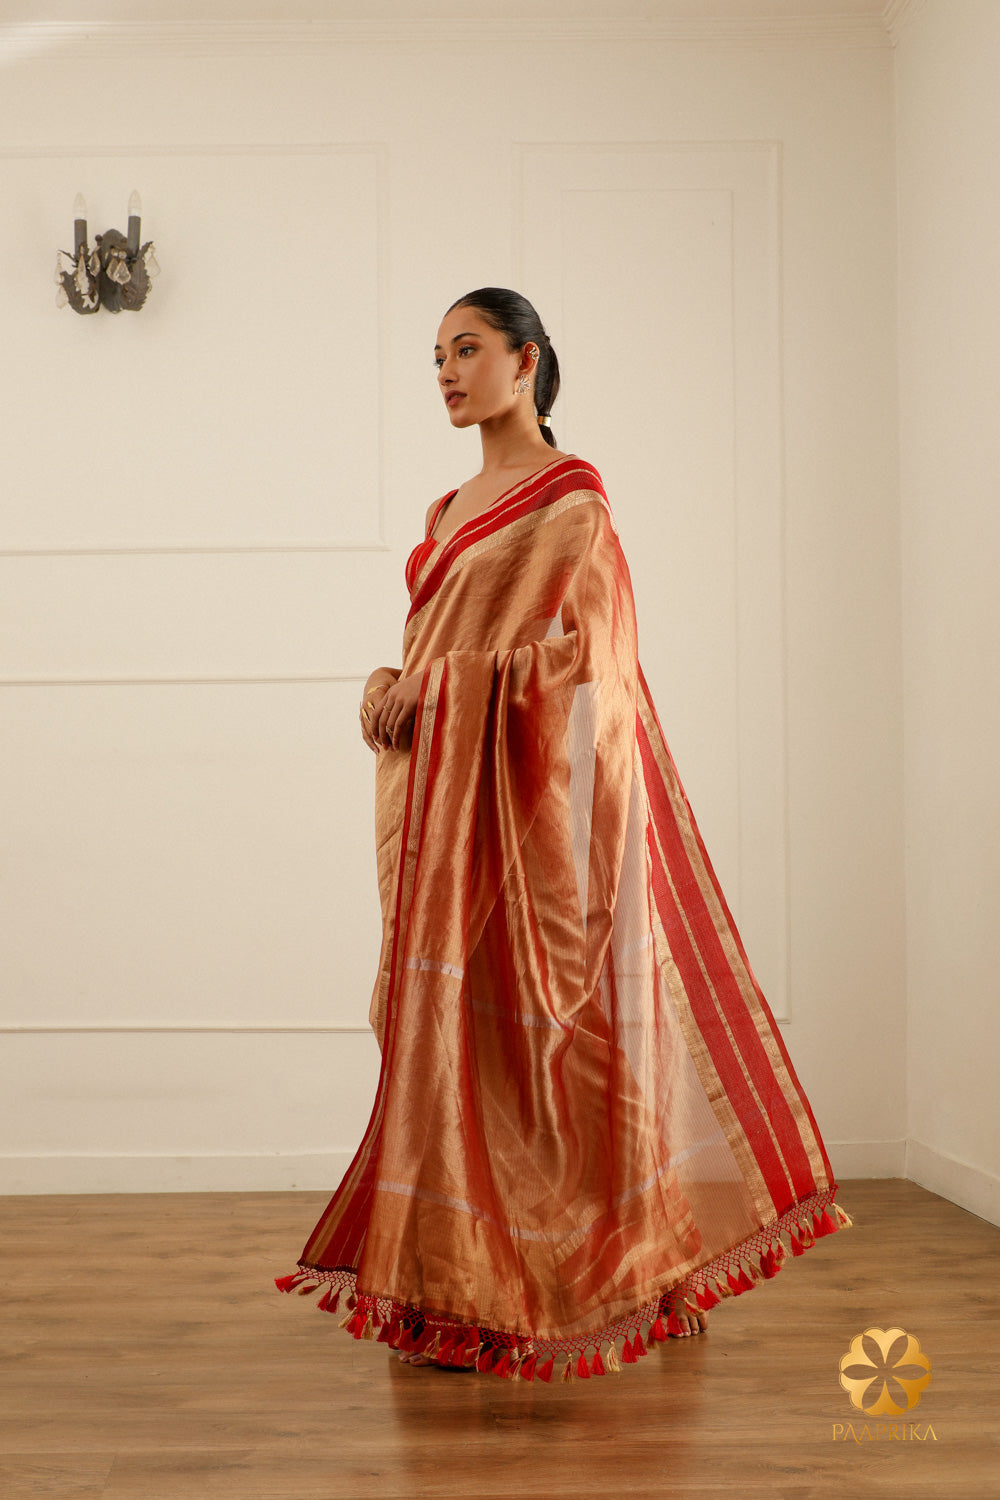 A close-up of the saree's pallu, highlighting the woven zari details and the refined craftsmanship.